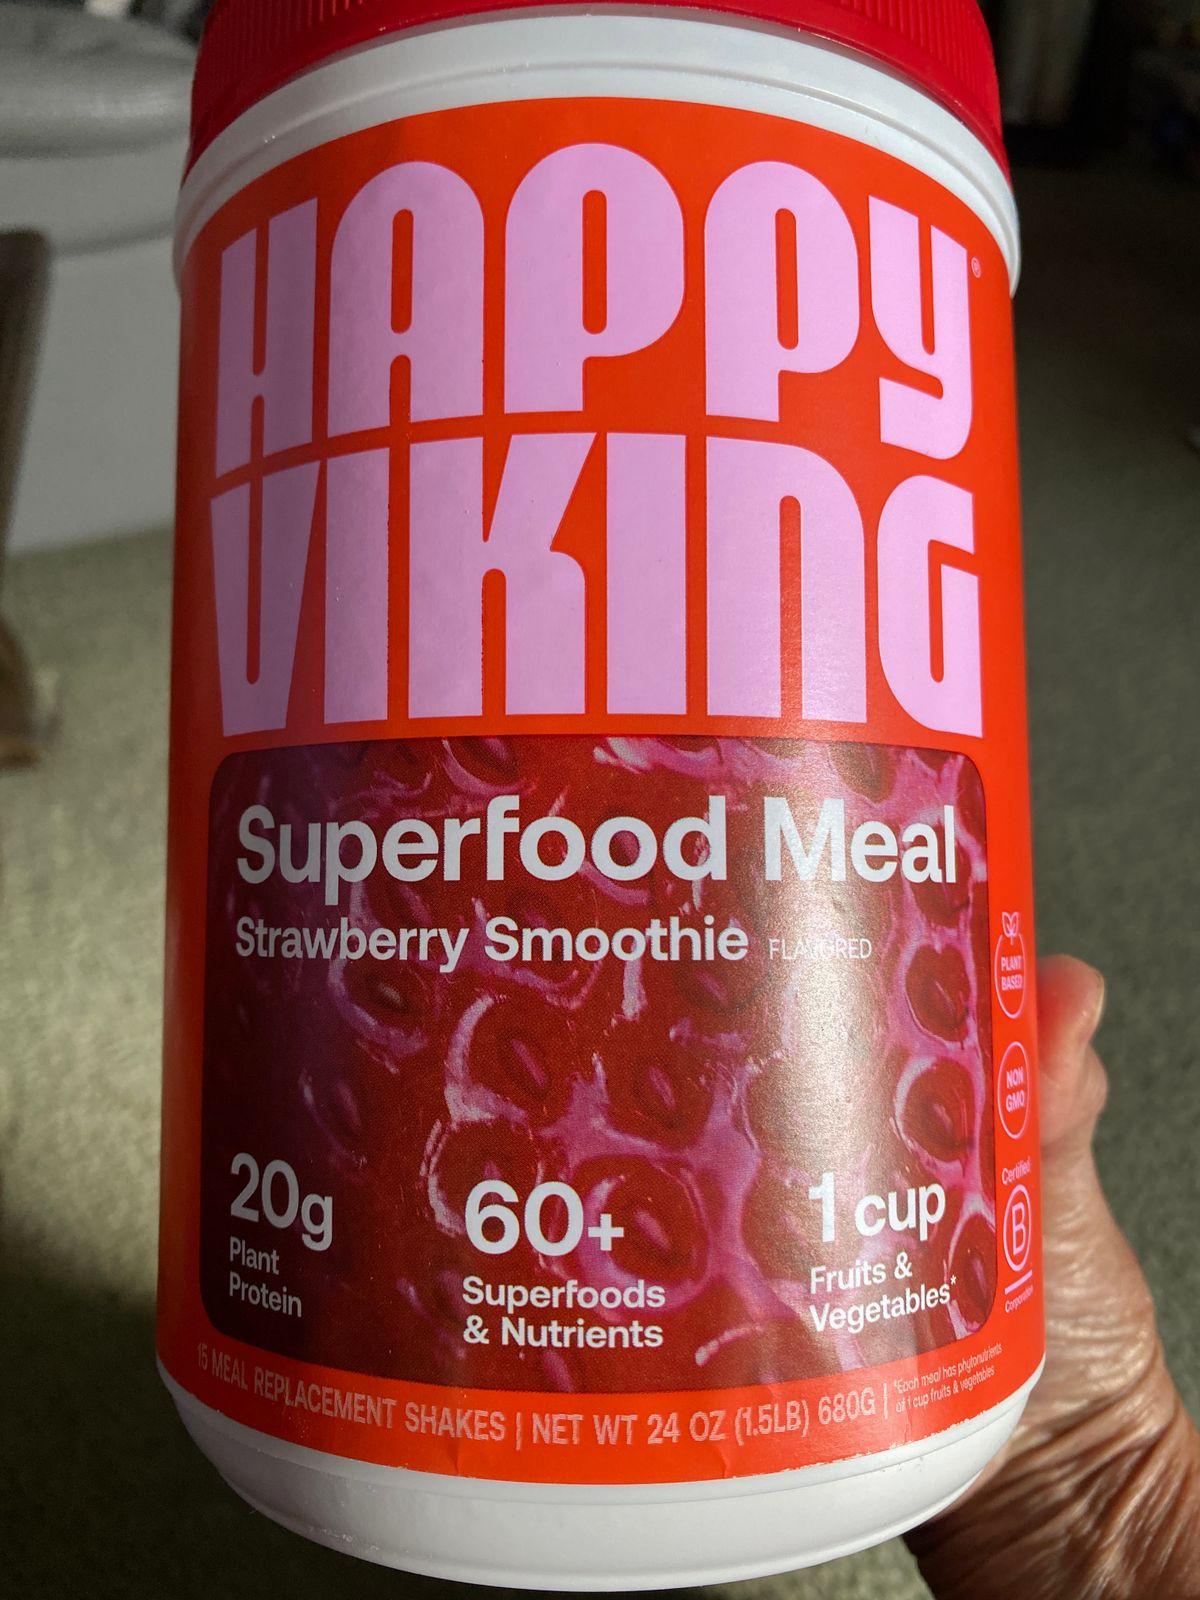 A pink tub of Happy Viking Superfood Meal in the flavor Strawberry Smoothie.